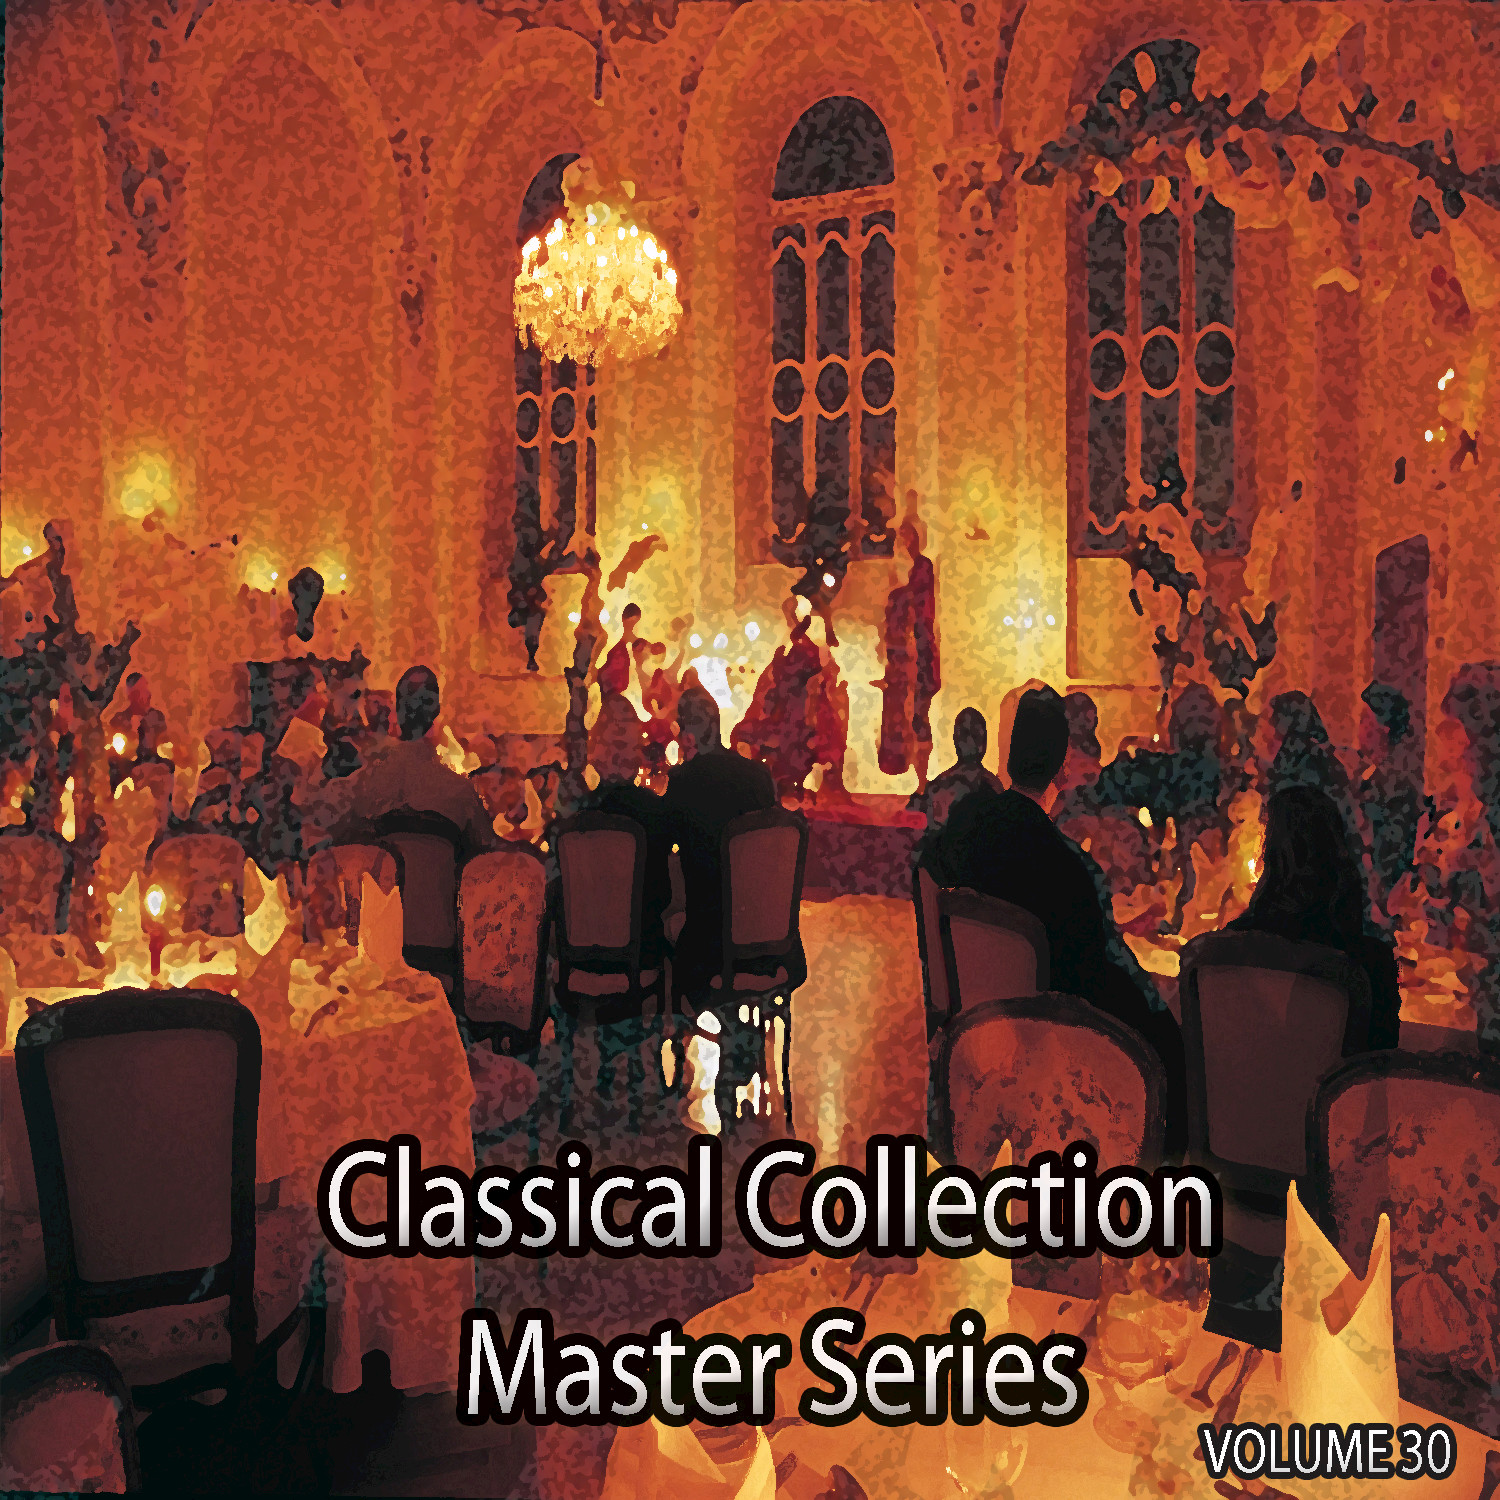 Concerto for Cello and Orchestra No. 1 in A Minor, Op.33: Pt. 4